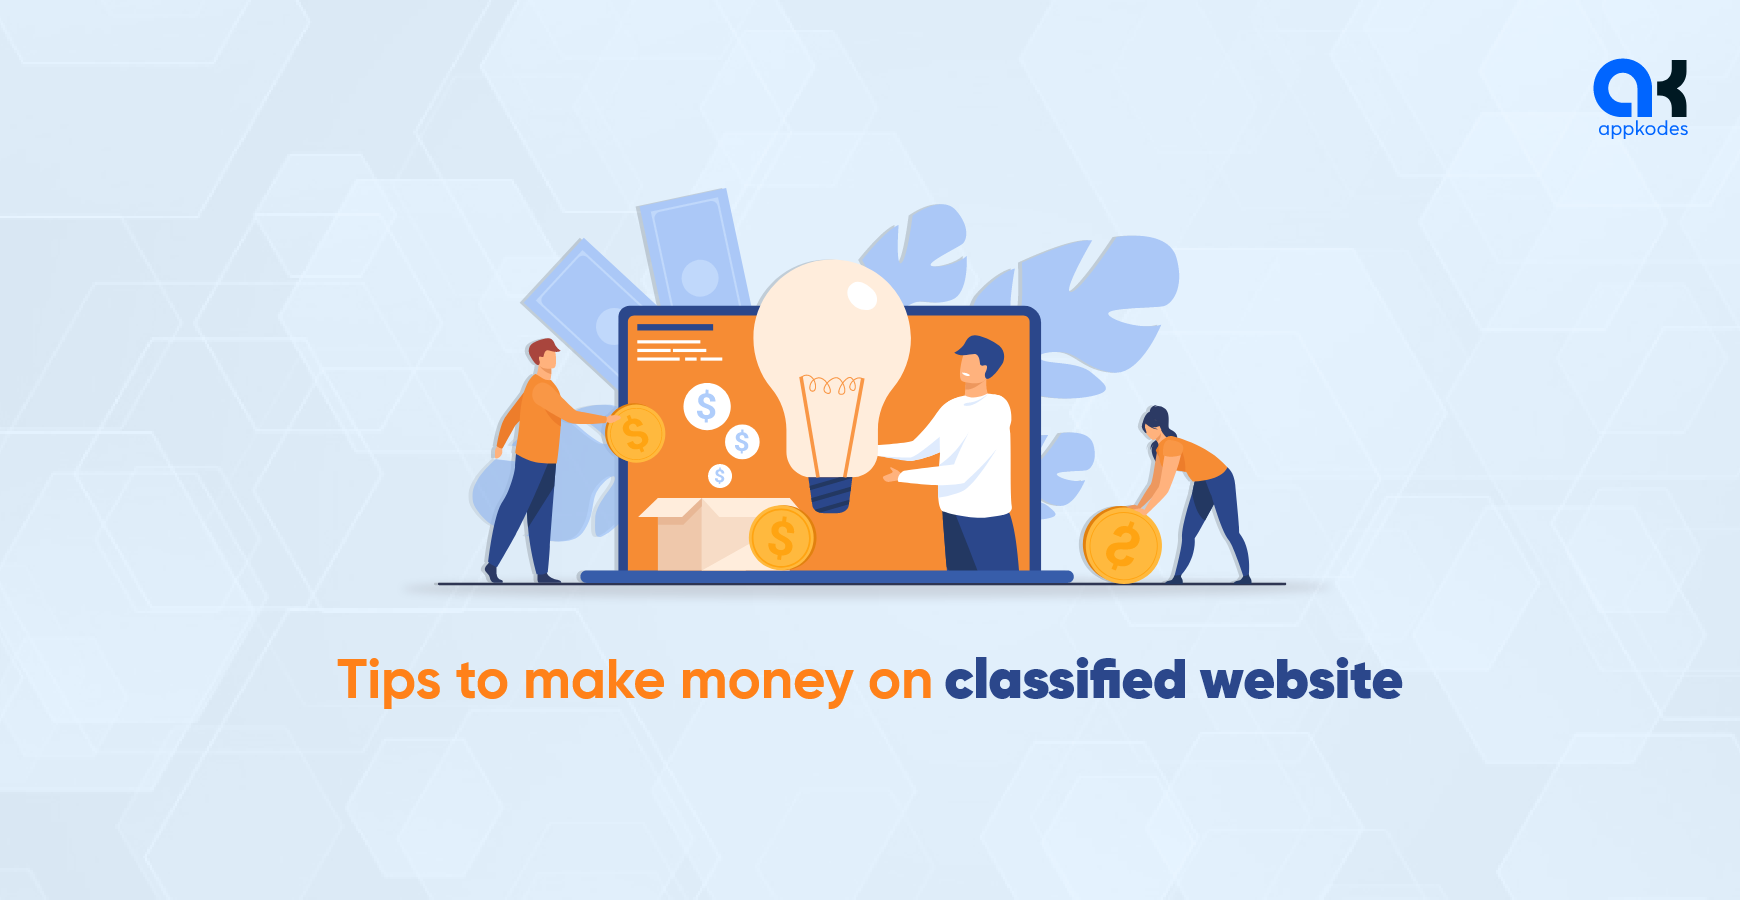 Tips to make money on classified website